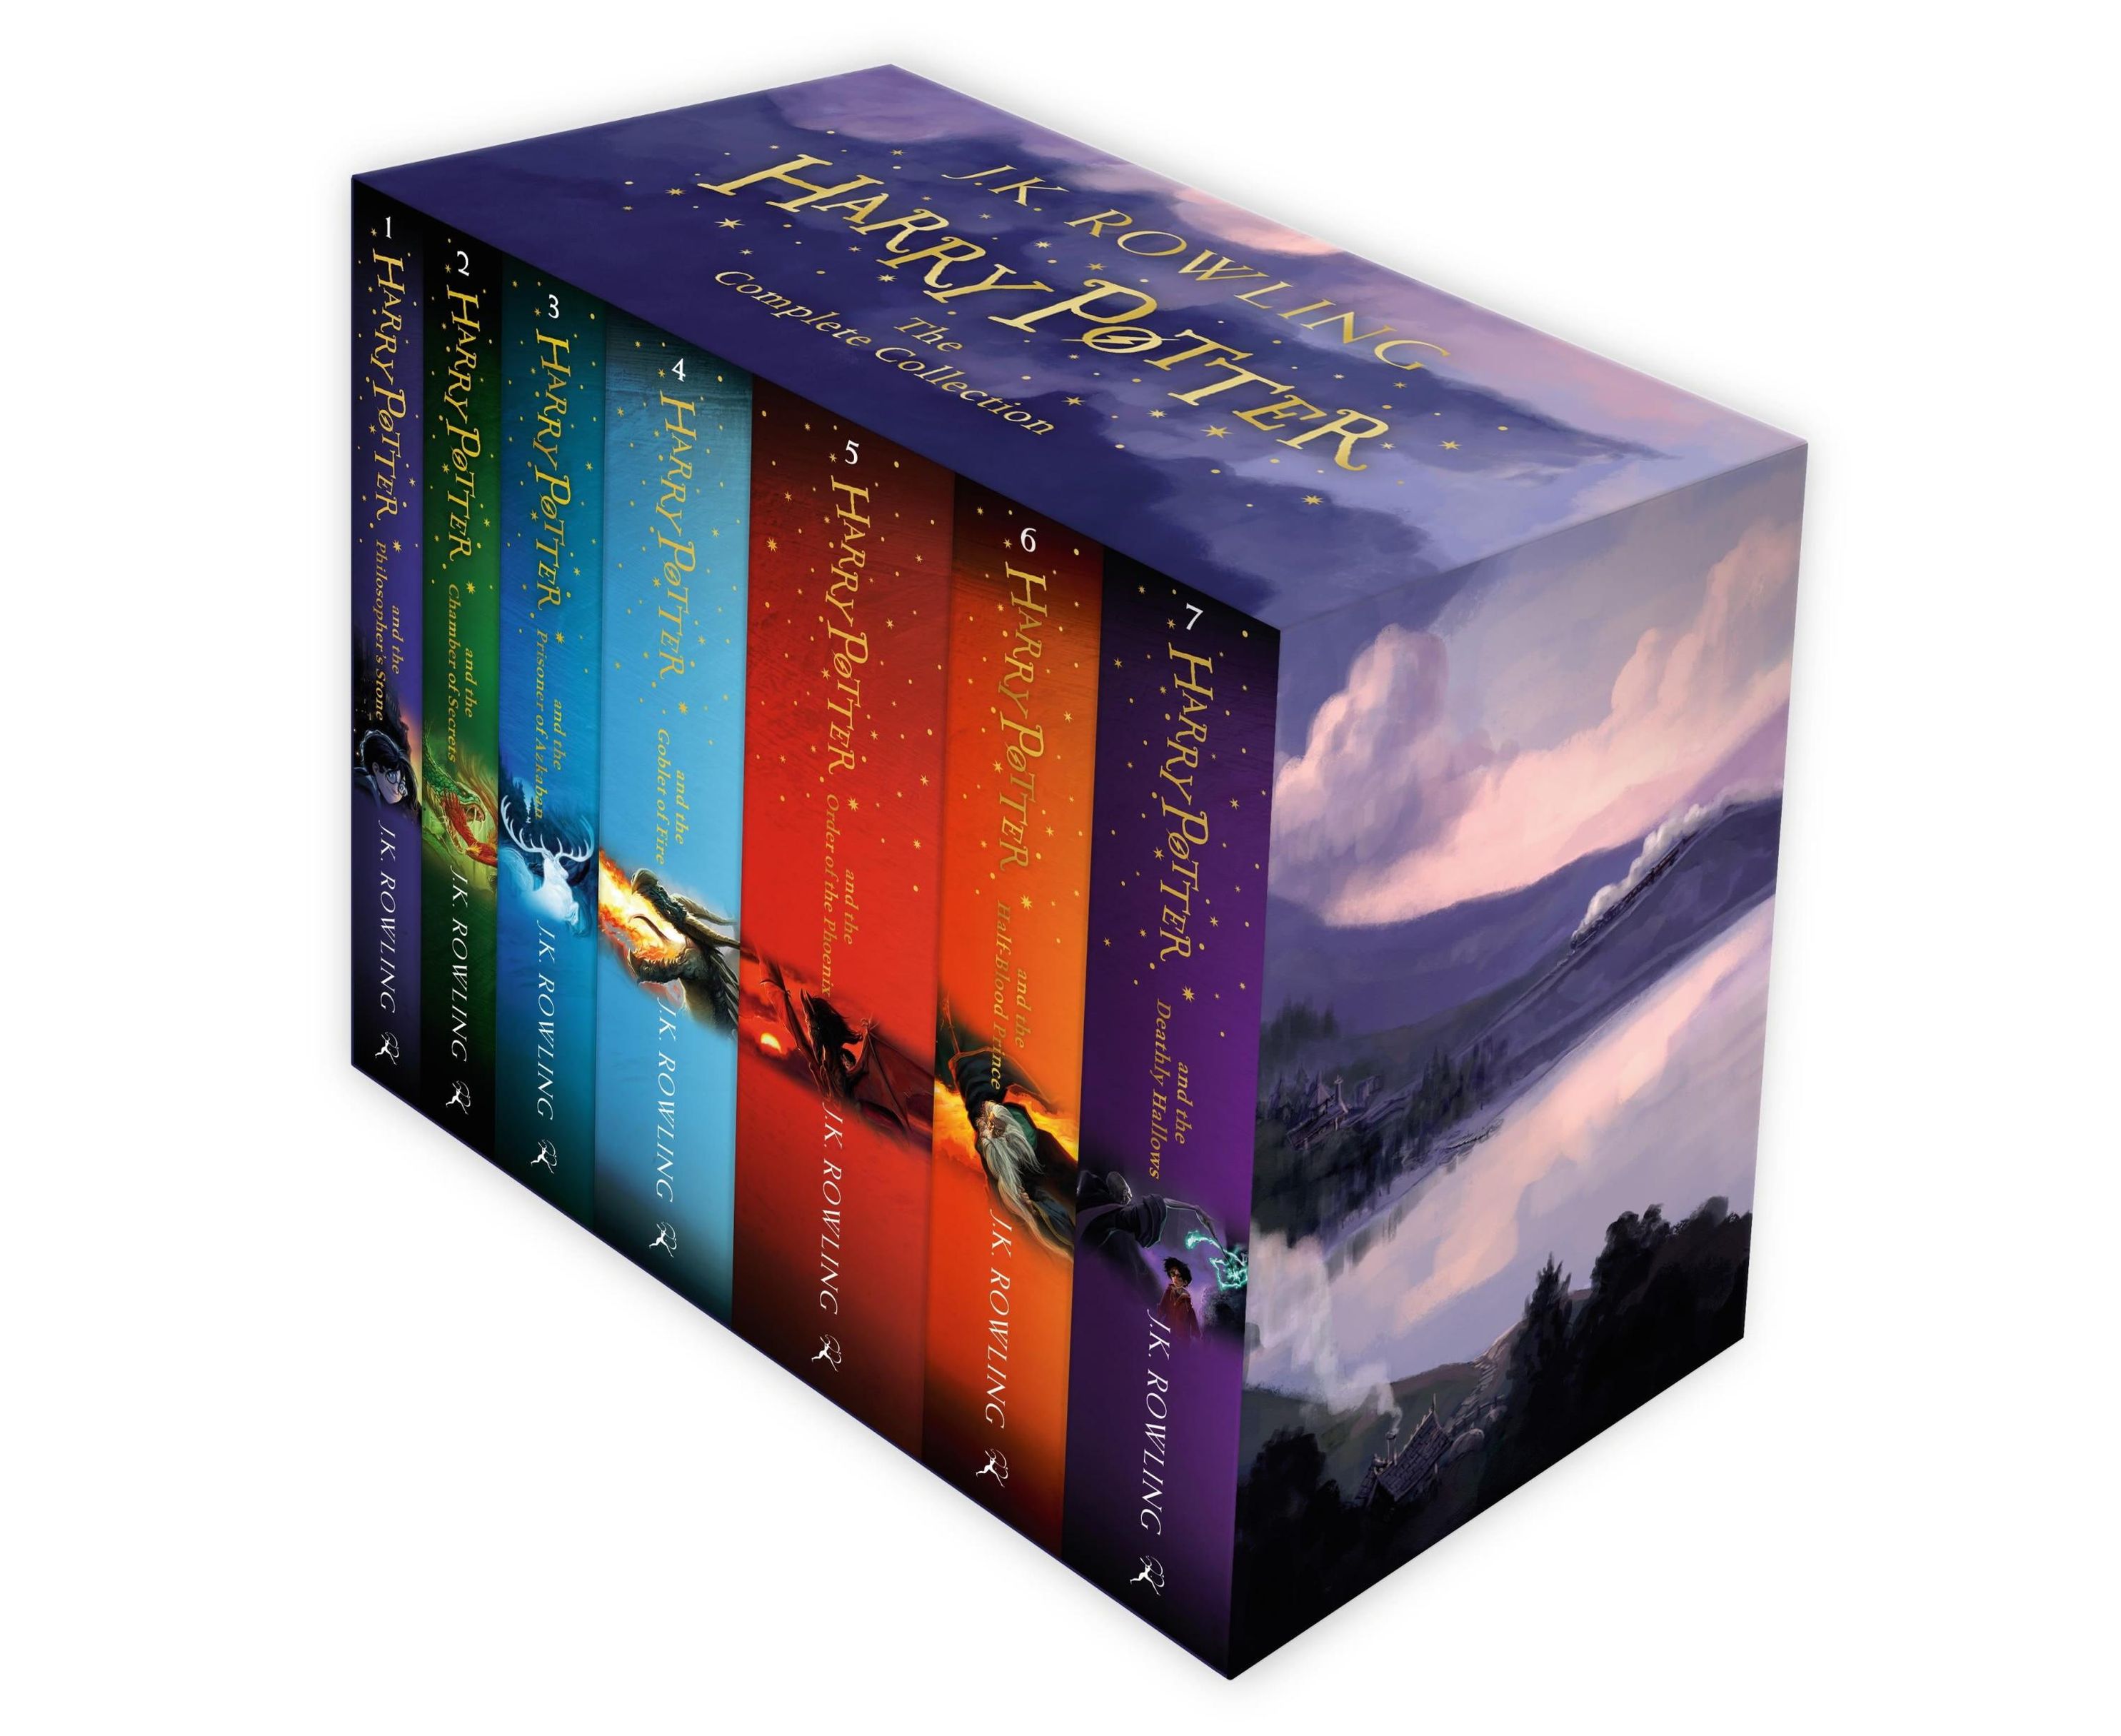 Harry Potter Box Set: The Complete Collection Children's Paperback, m. Buch,  m. Buch, m. Buch, m. Buch, m. Buch,